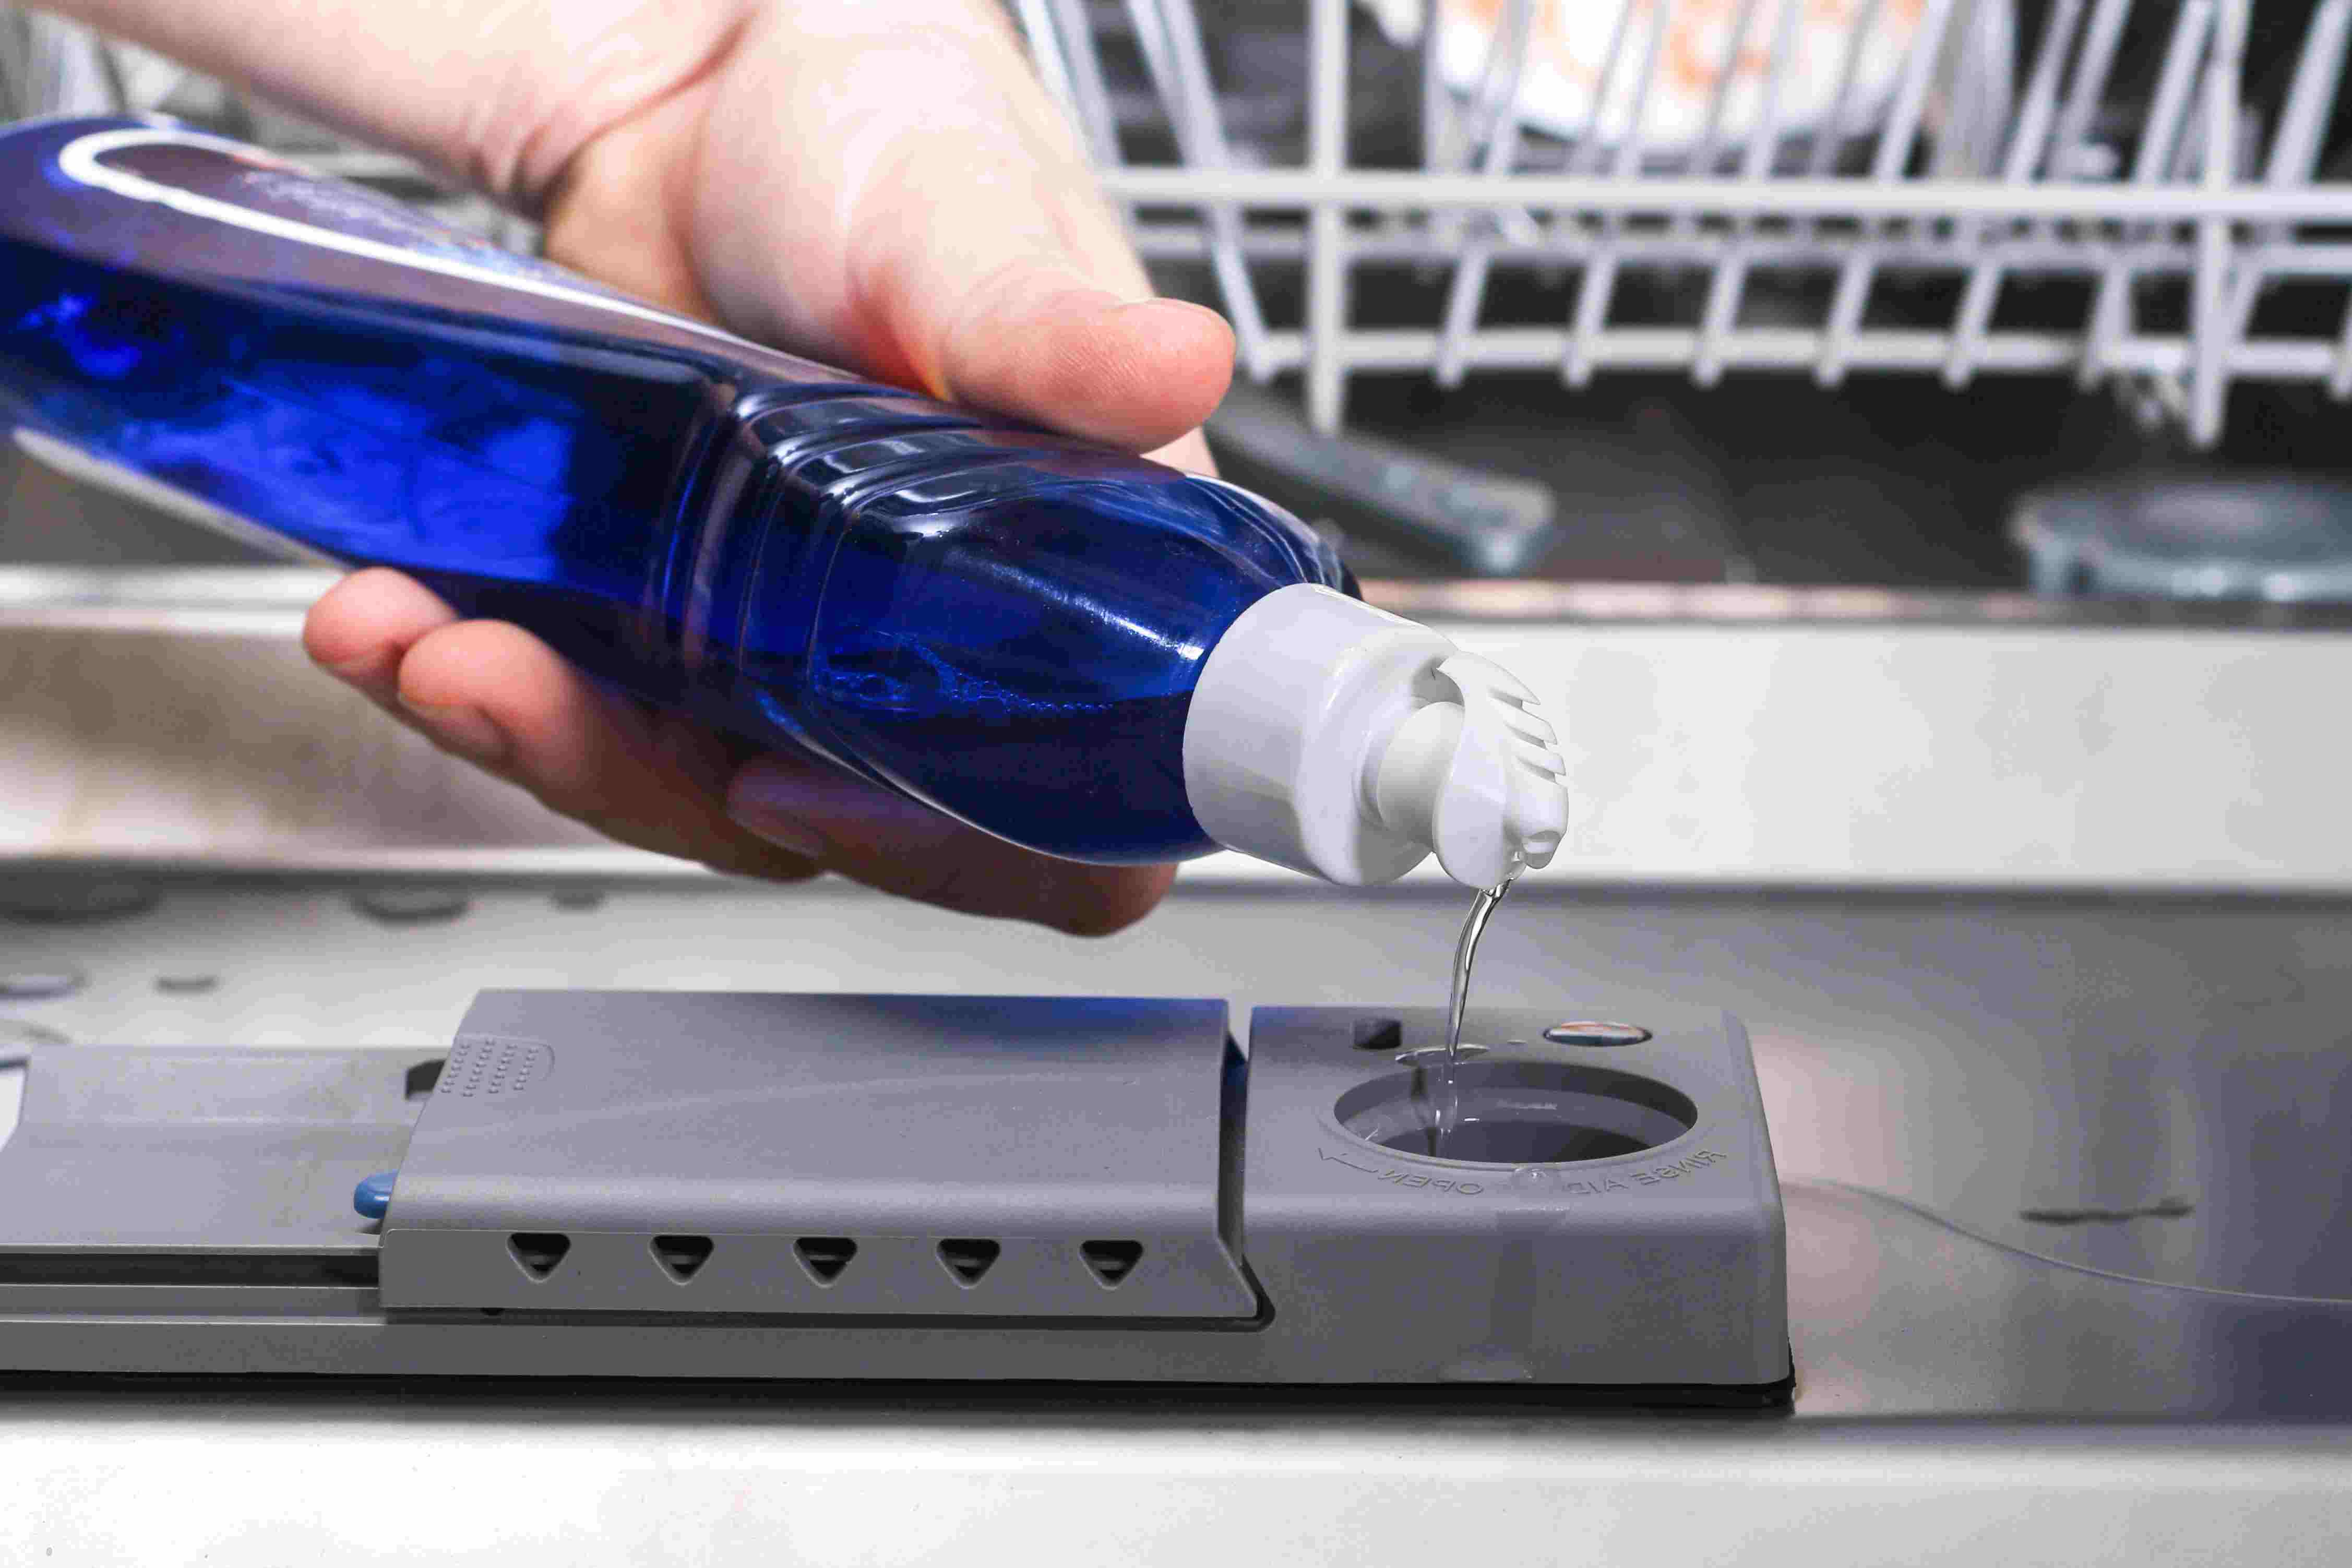 23-facts-about-dishwasher-rinse-aid